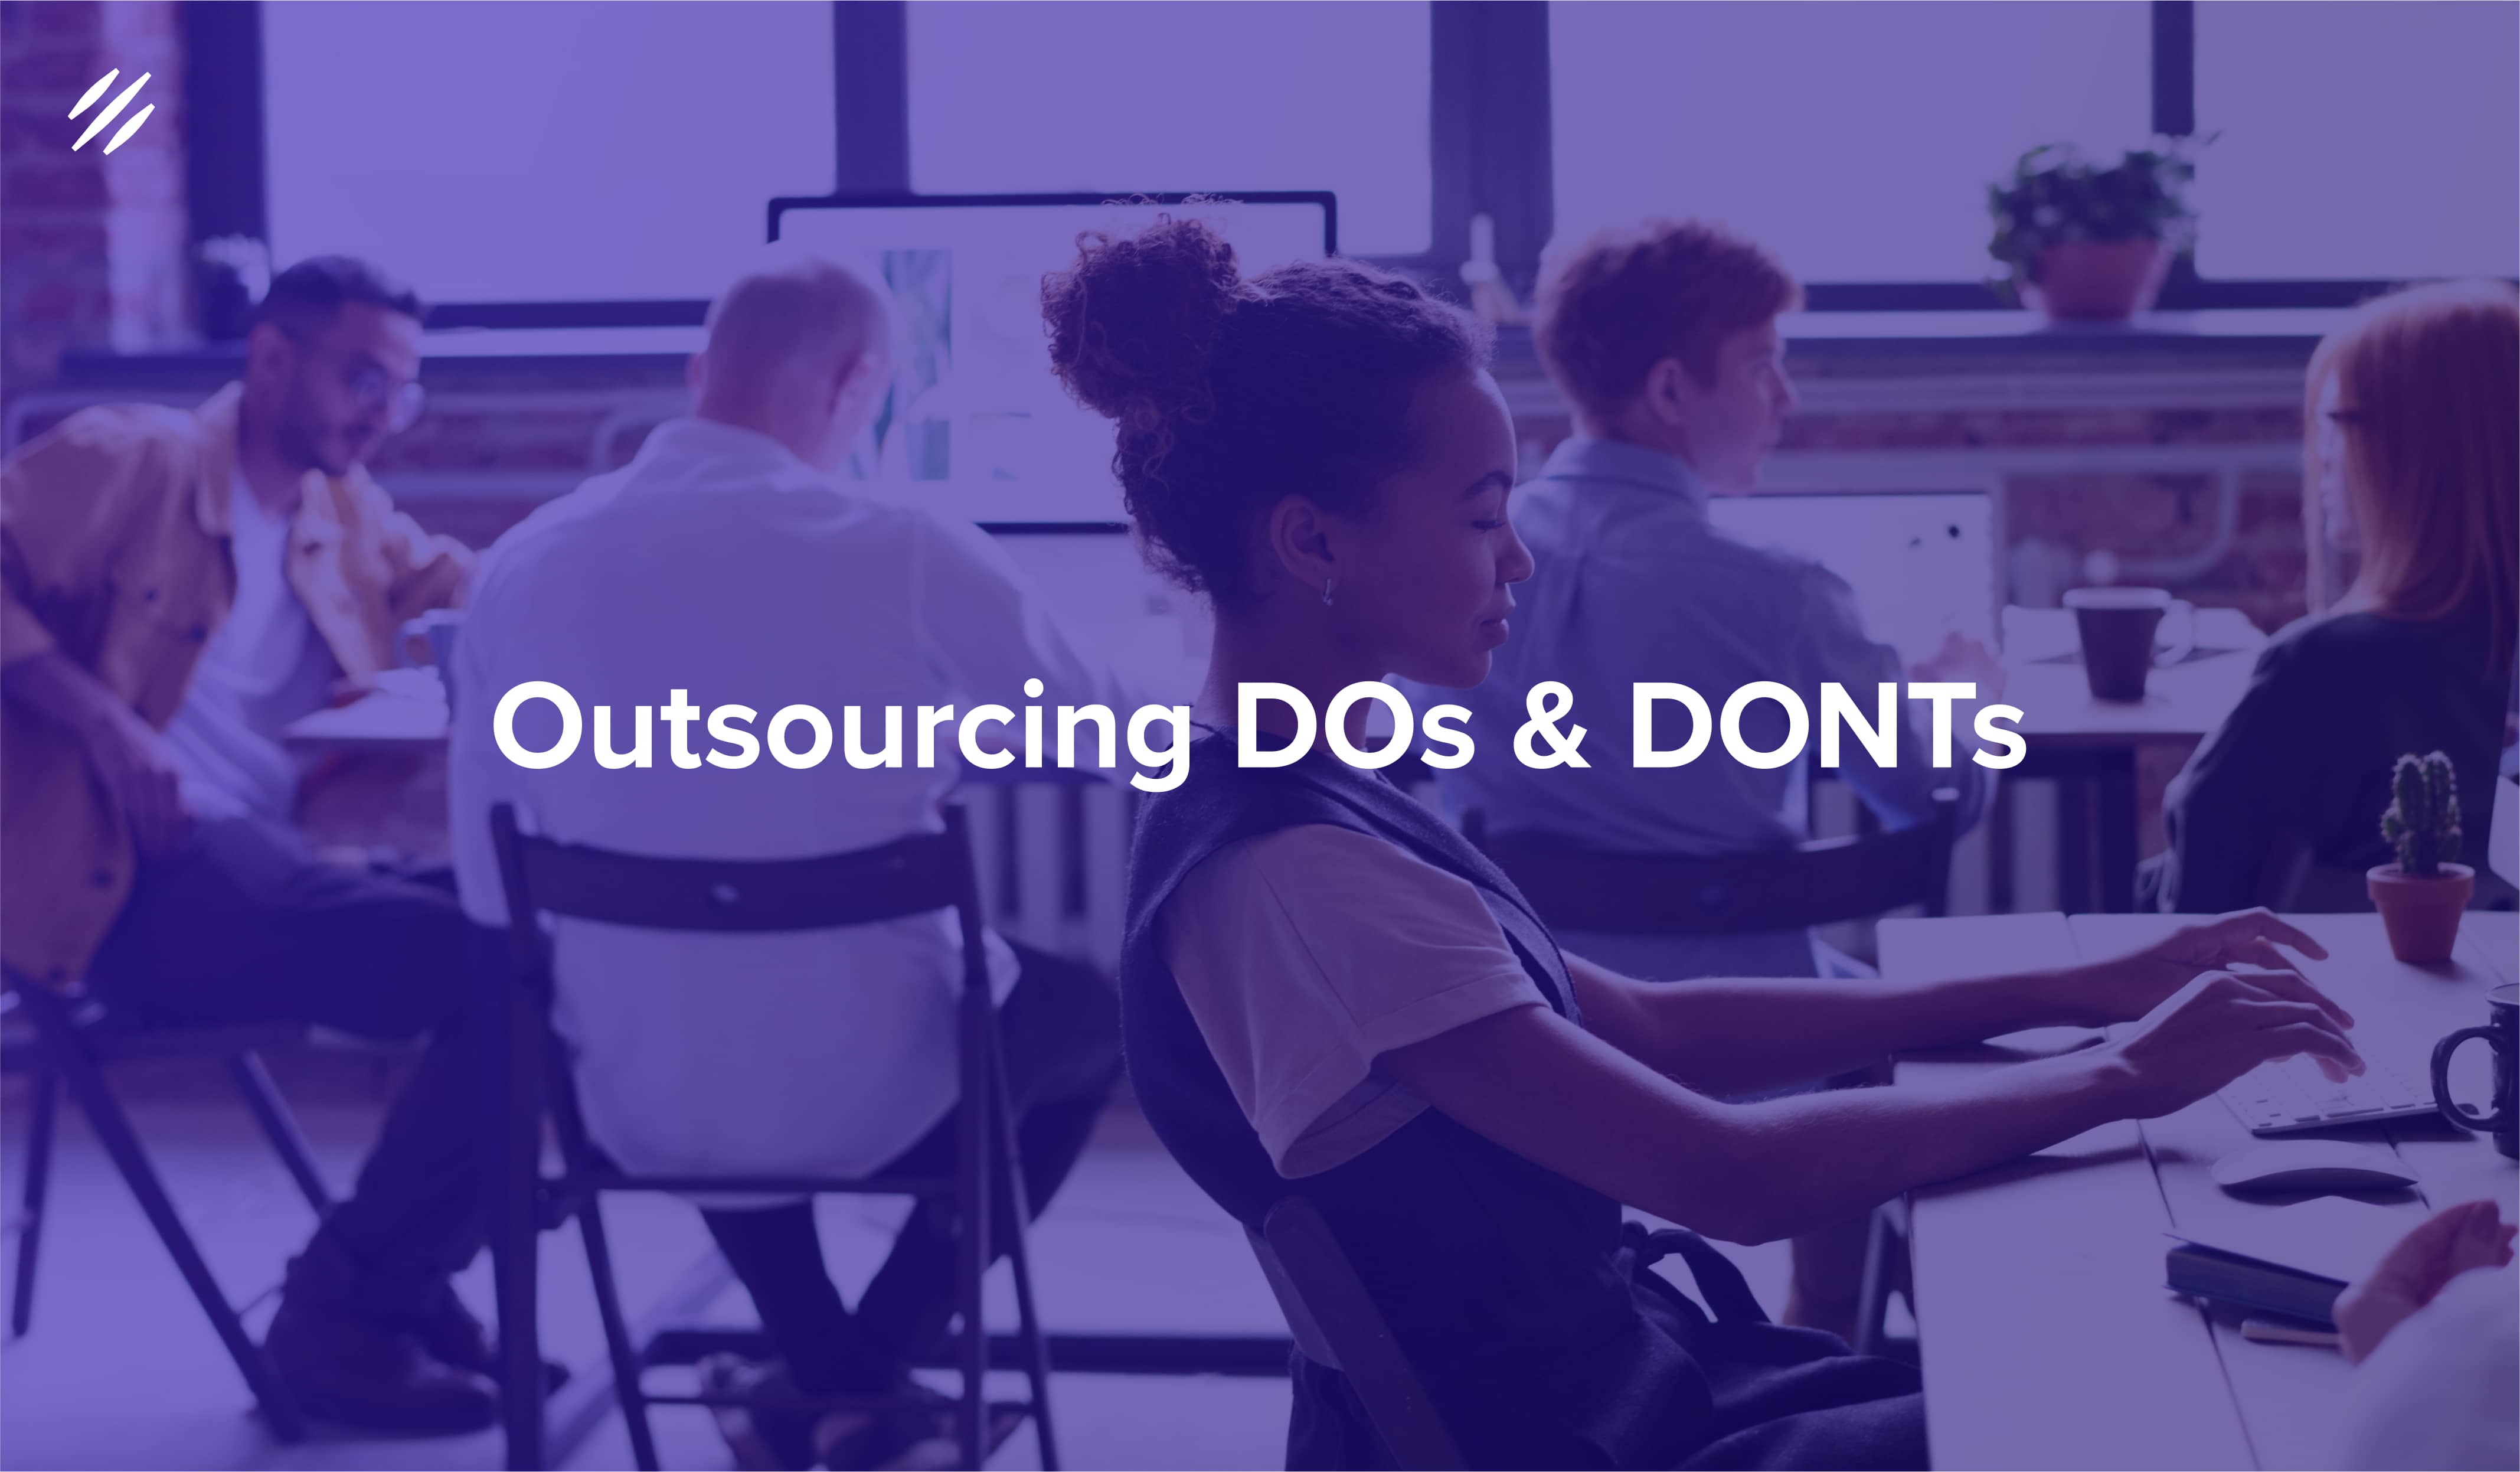 Outsourcing: The DOs and DON'Ts for Every Company